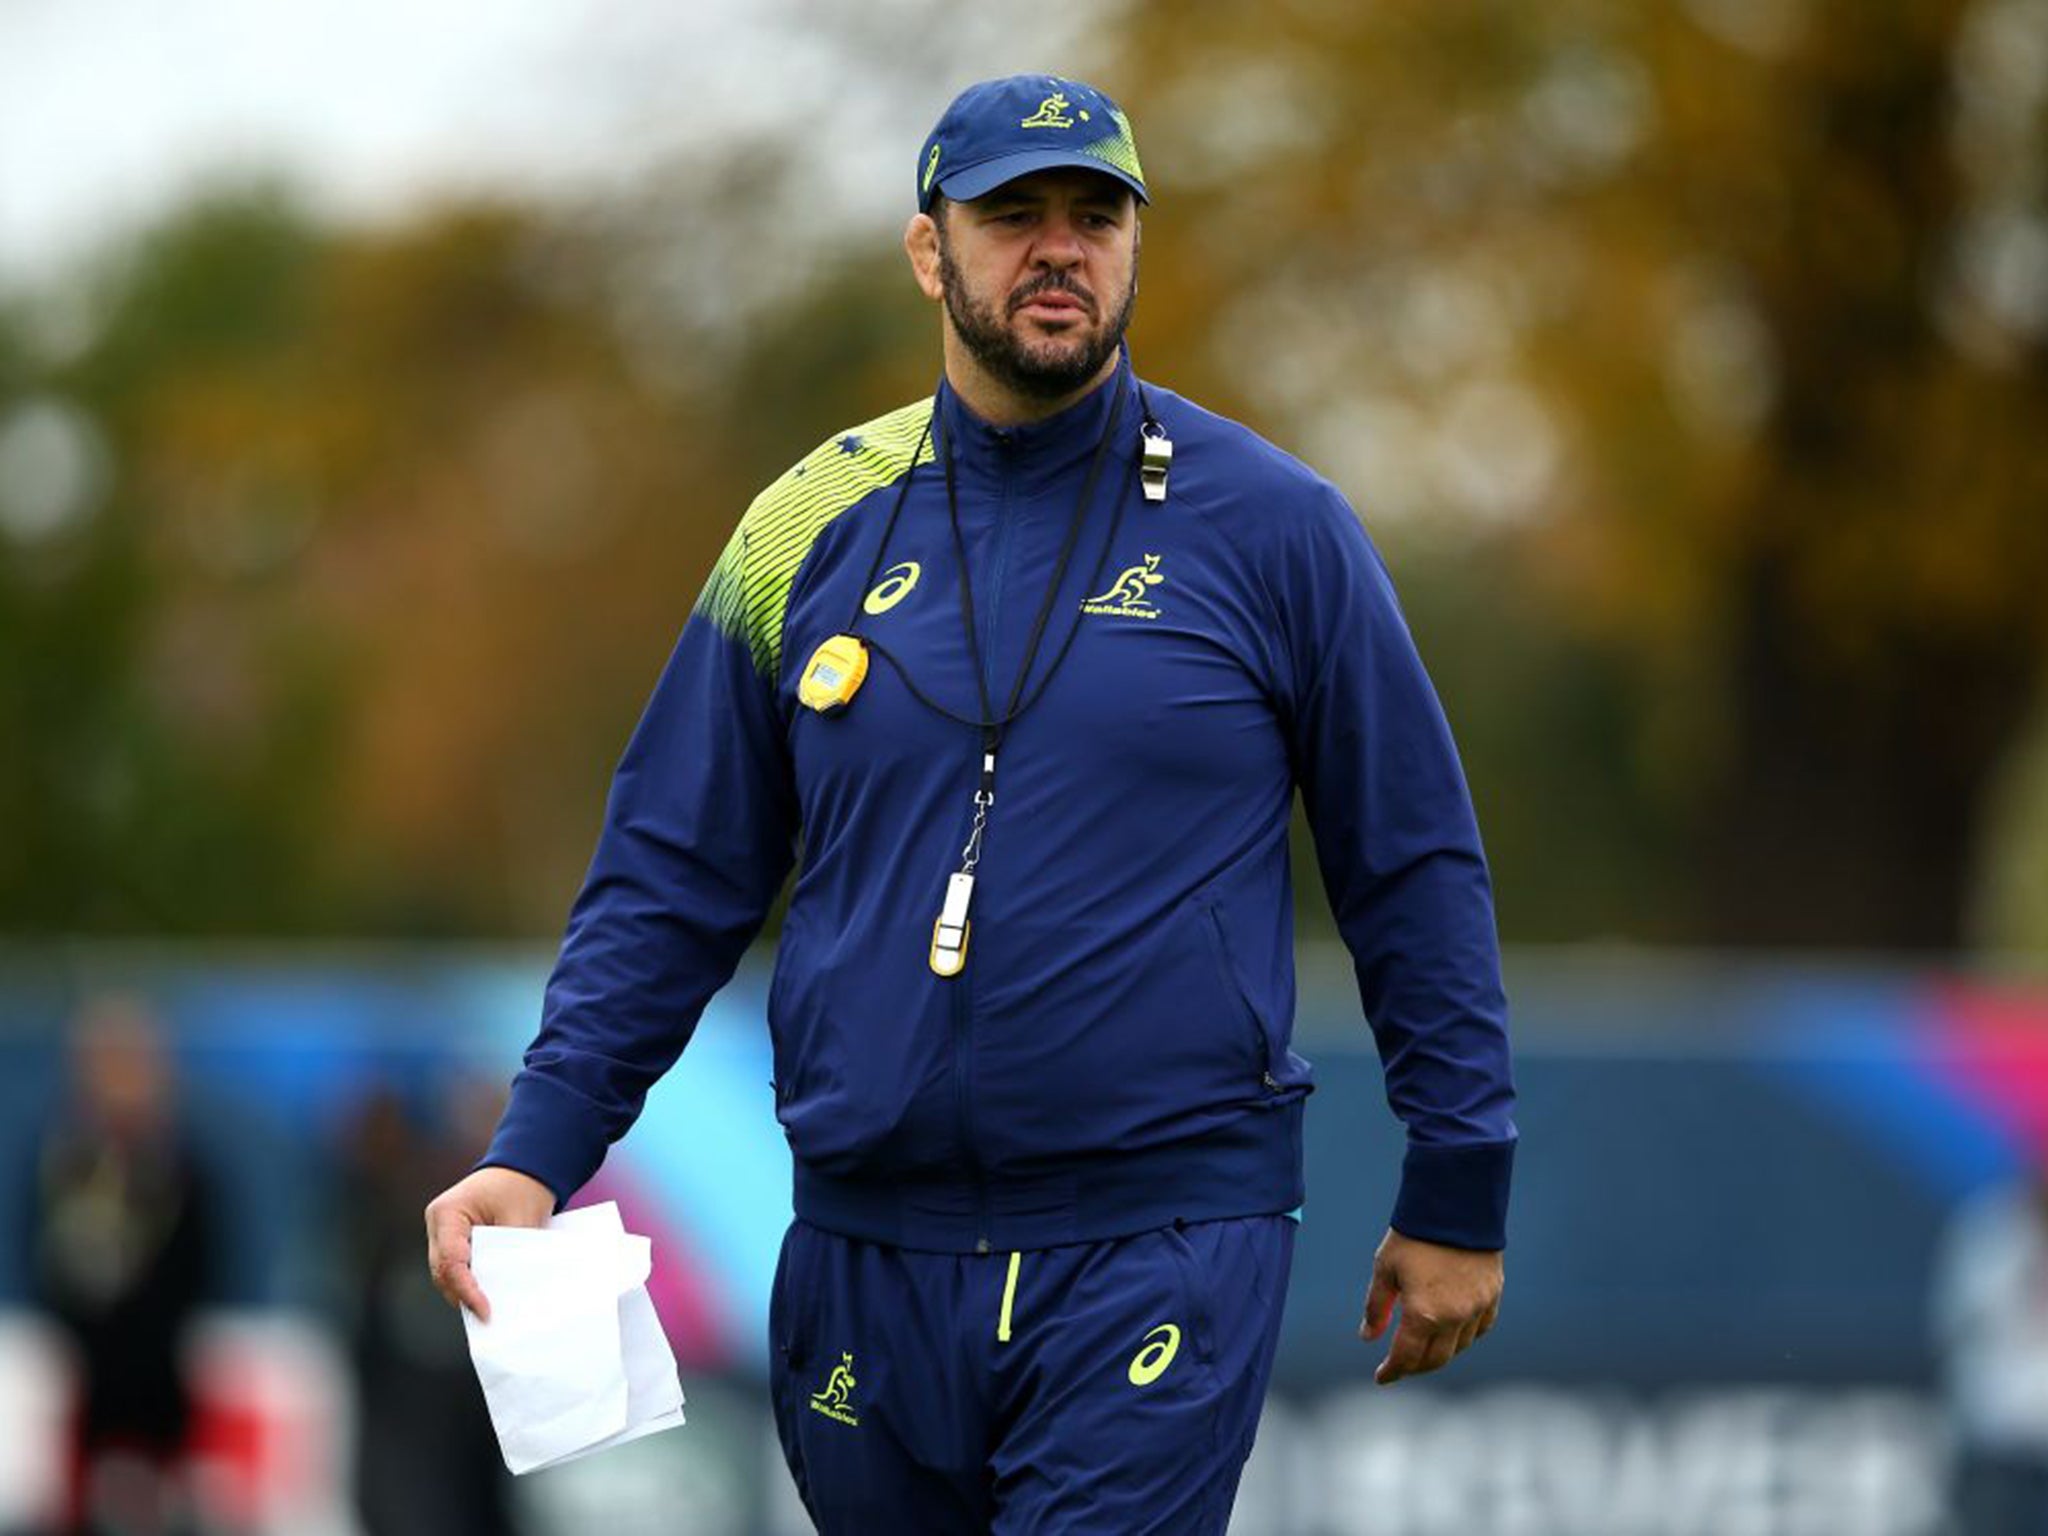 Michael Cheika (Aus) Head coach Australia, 48, contracted until 2017. Australia and former Leinster, Stade Français and Waratahs coach, good with the media and has brought errant Wallabies into line